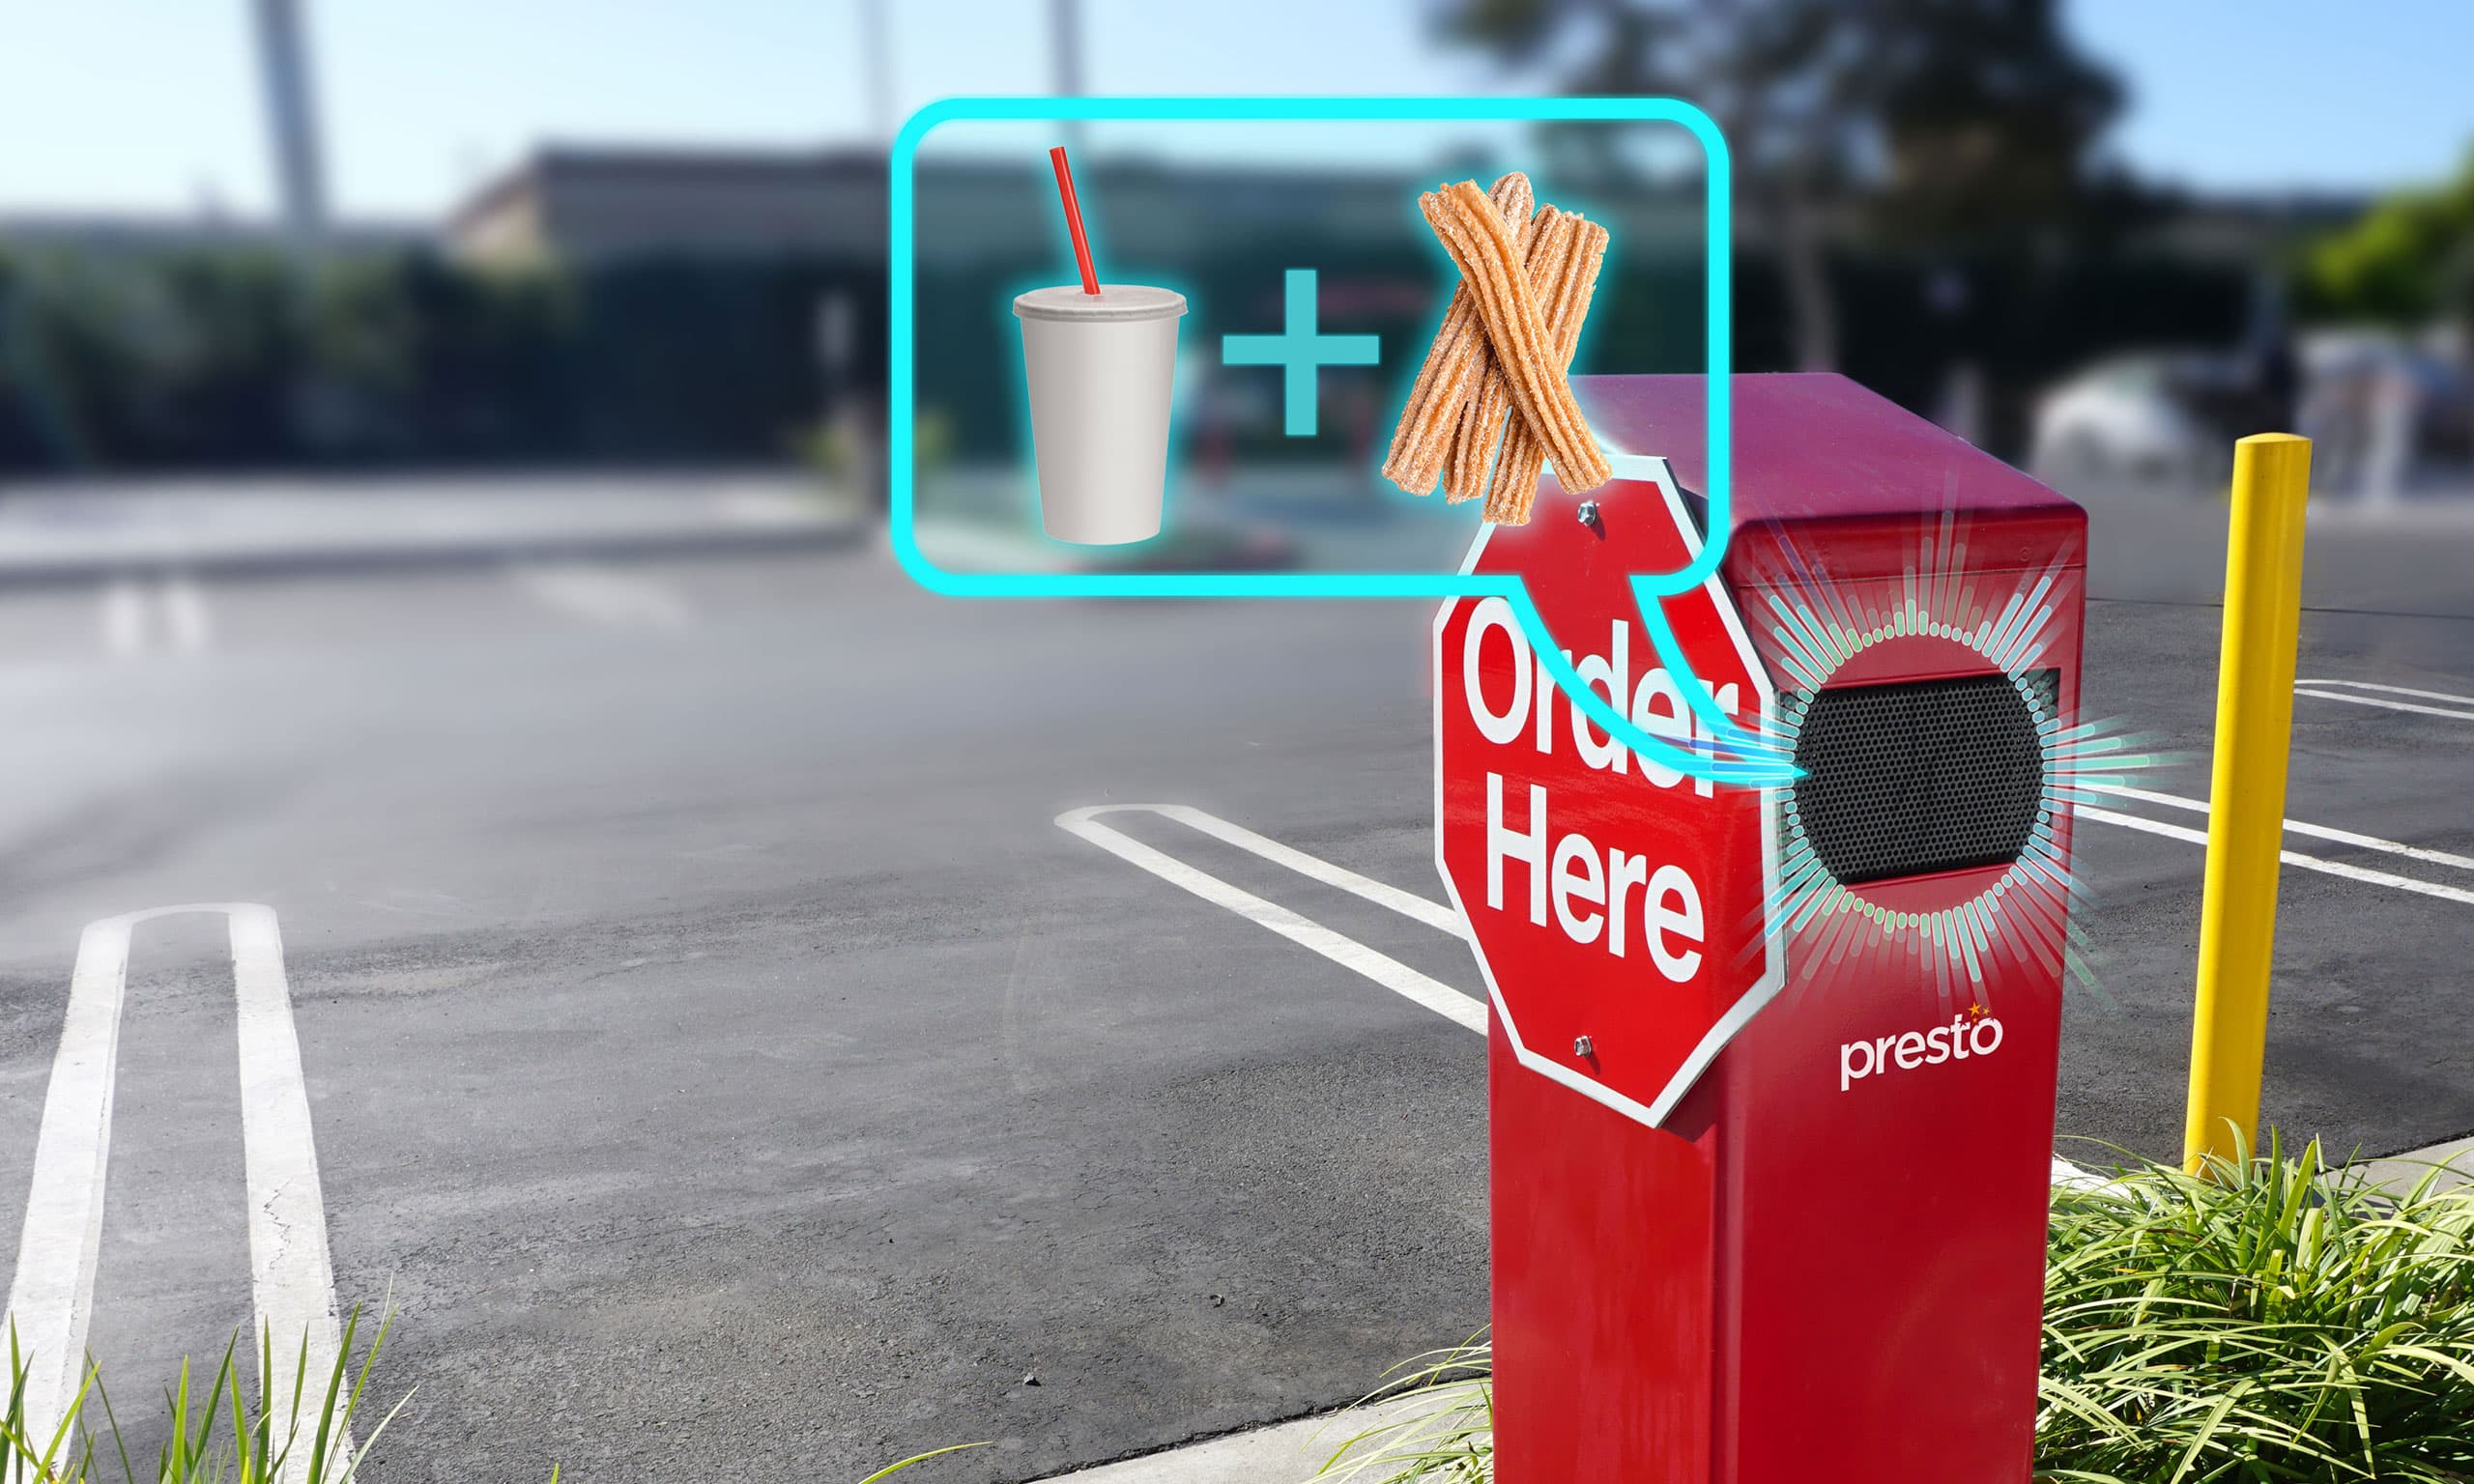 Drive-thru speaker box image showing a visual of the upsell with a soft drink and churros being offered.